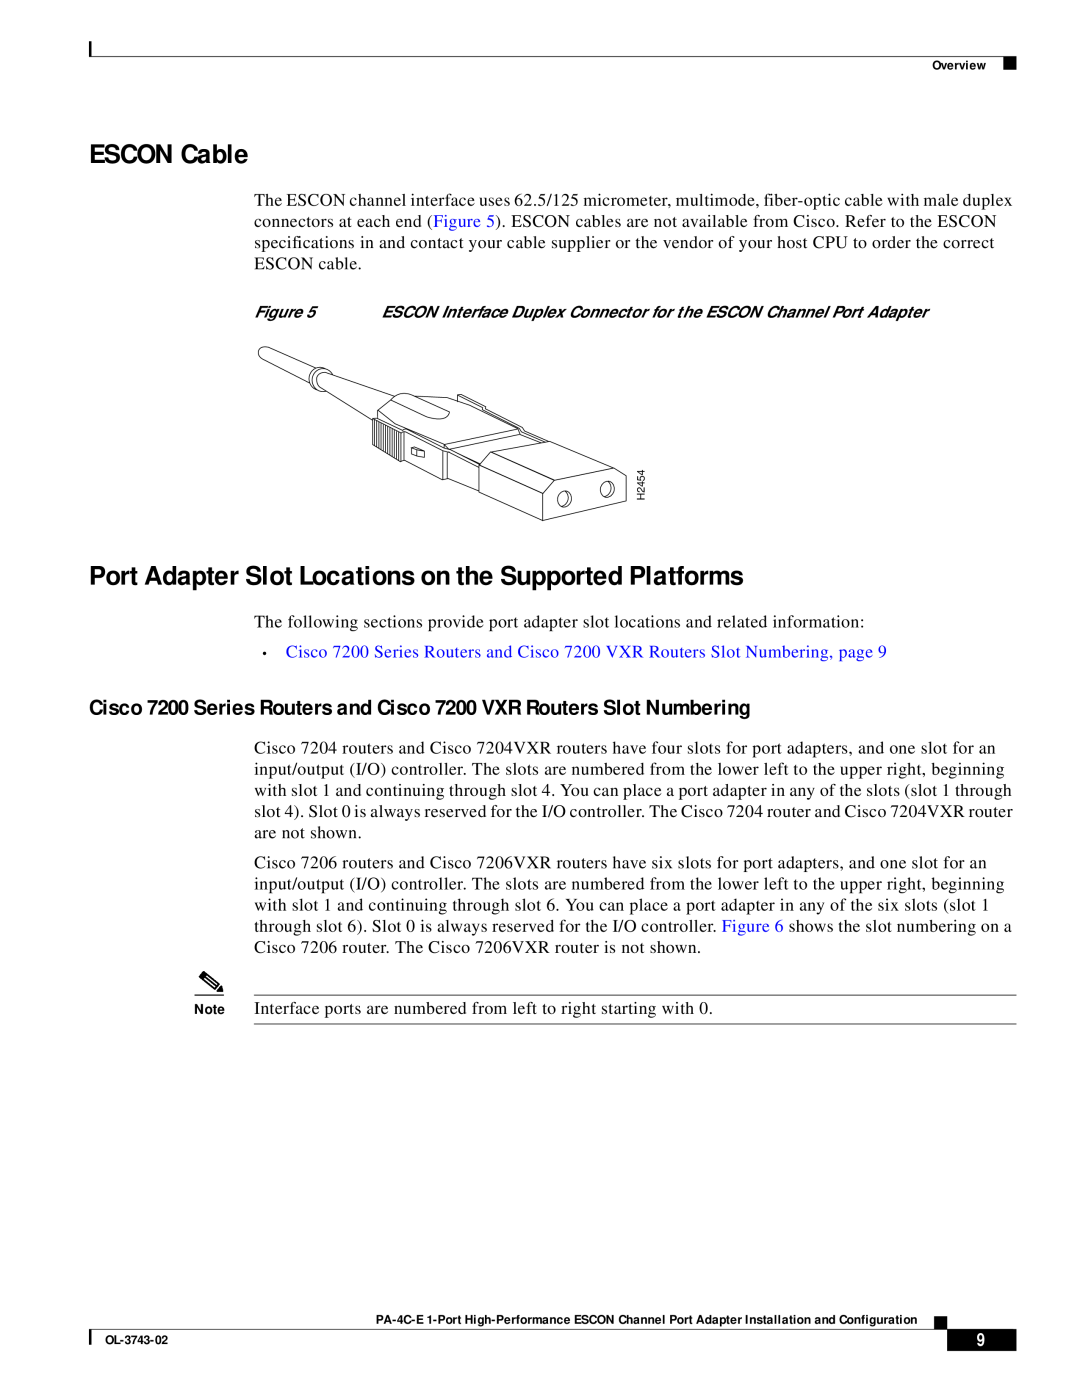 Cisco Systems PA-4C-E 1 manual ESCON Cable, Port Adapter Slot Locations on the Supported Platforms 